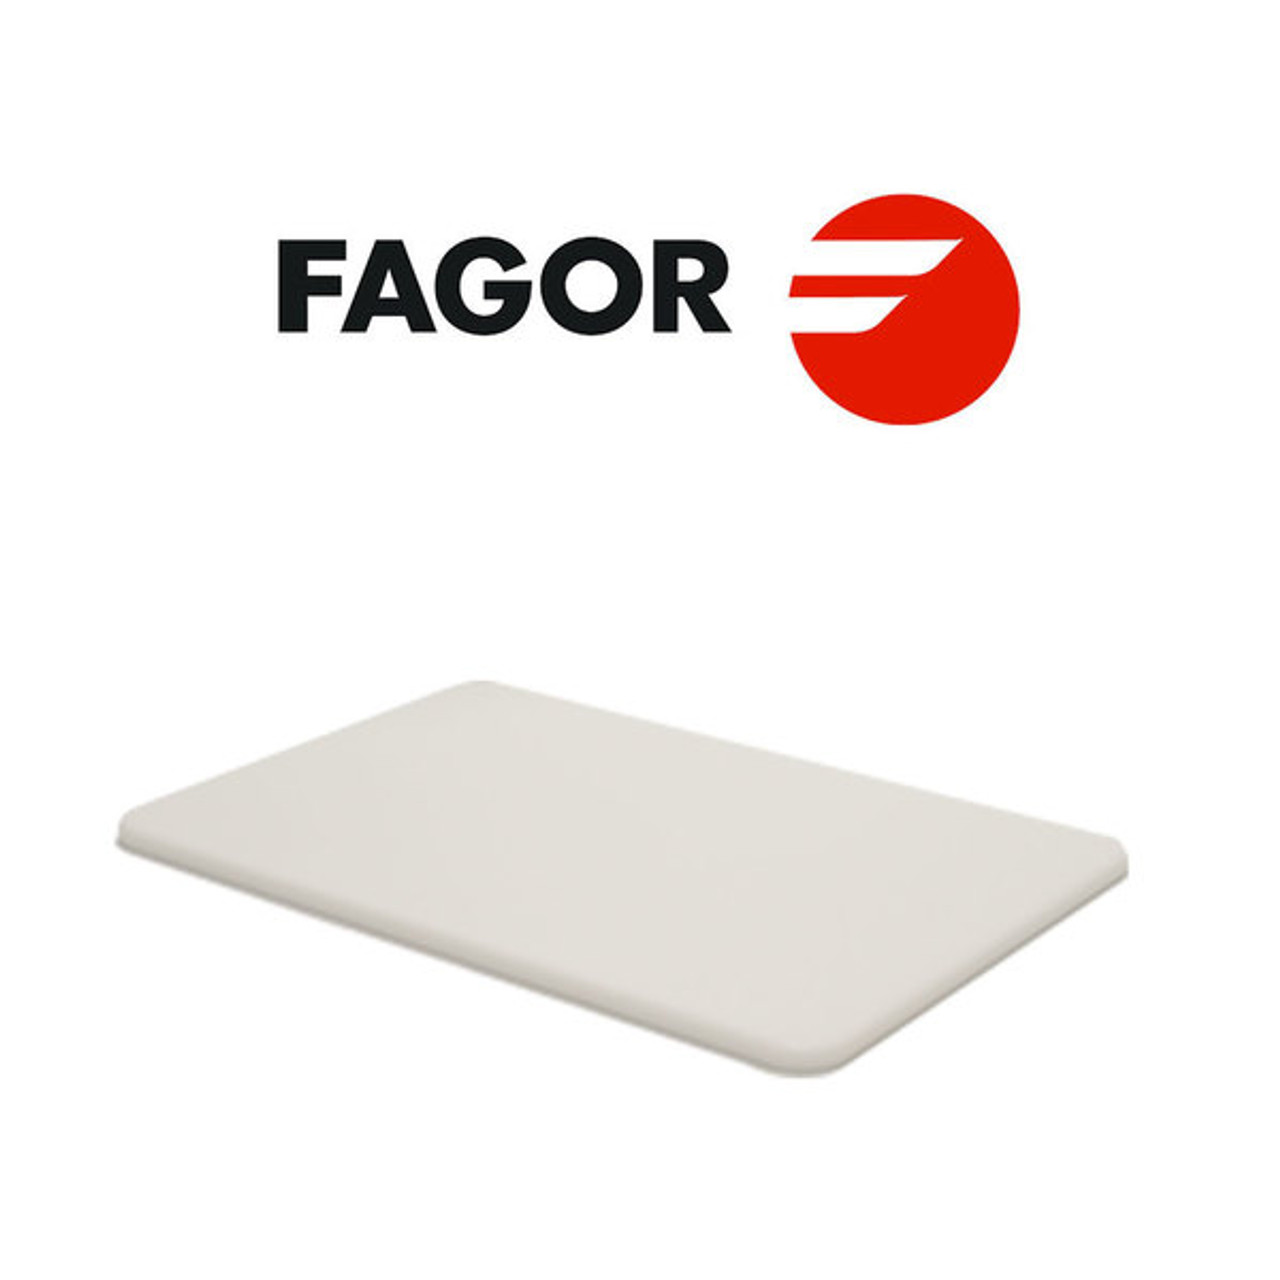 OEM Cutting Board - Fagor Commercial - P#: 600305M0011